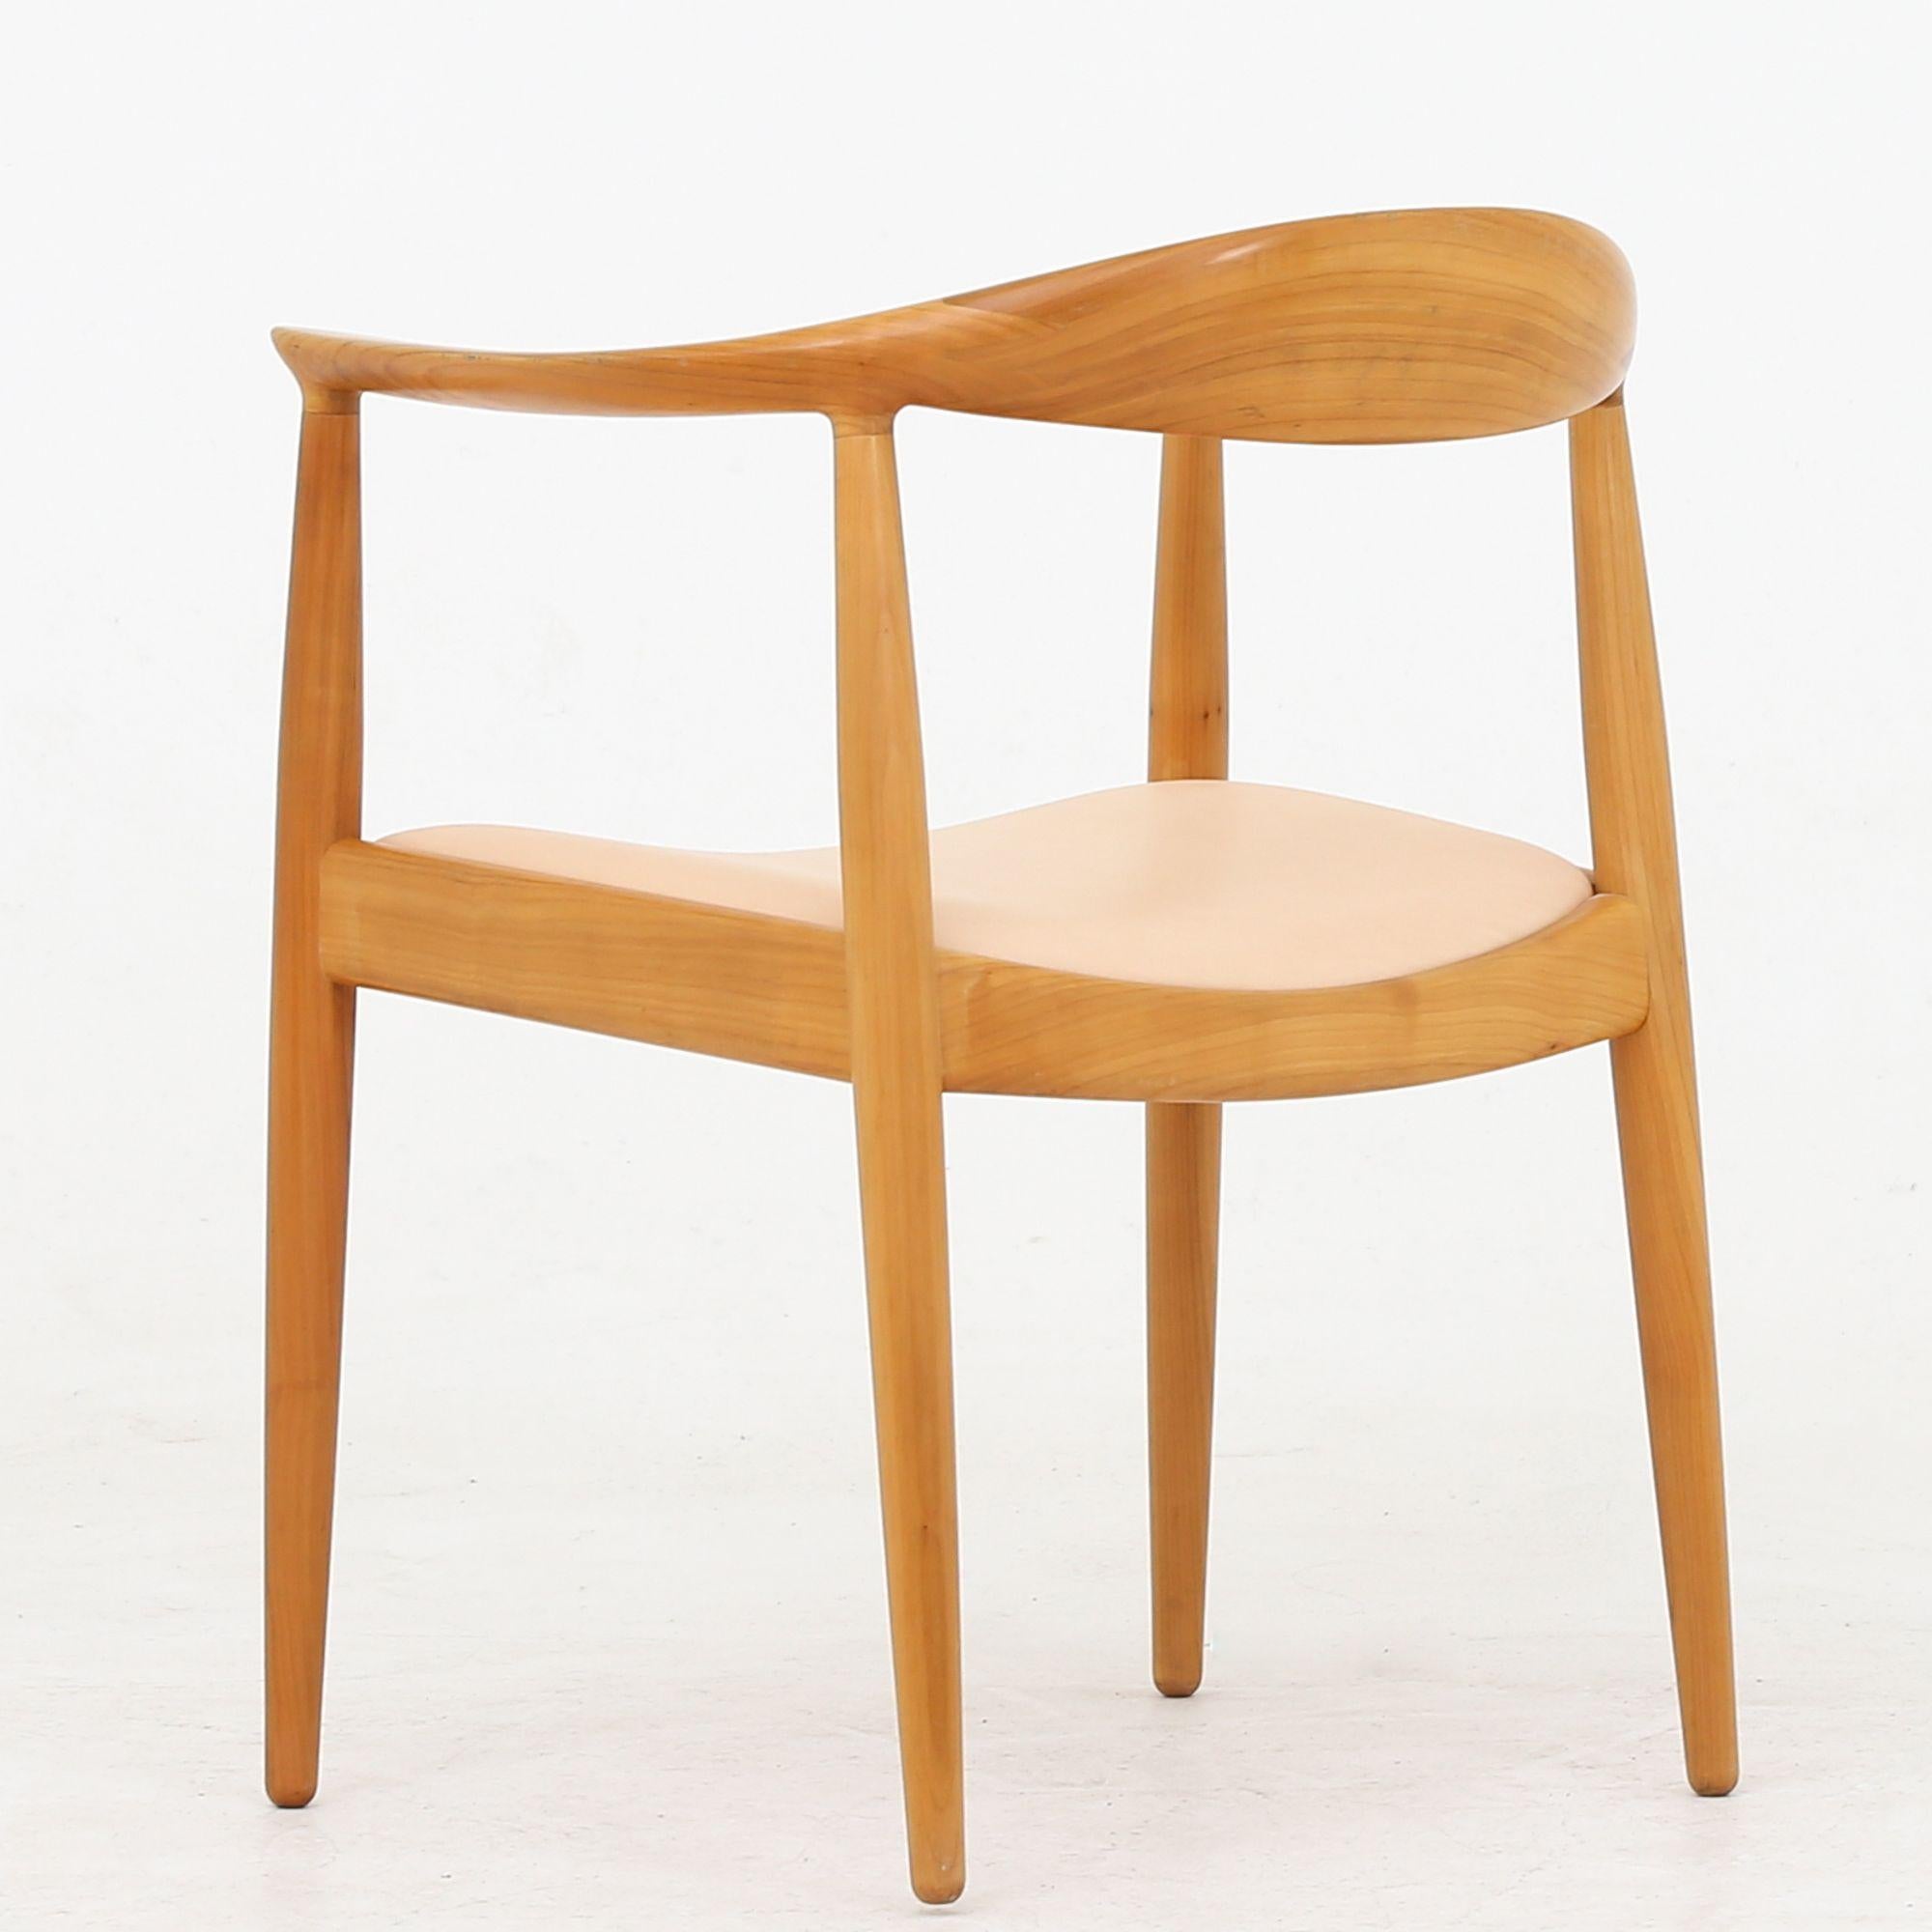 PP 503 - 'The Chair' in cherry wood with seat upholstered in new natural leather. Hans J. Wegner / PP Møbler.